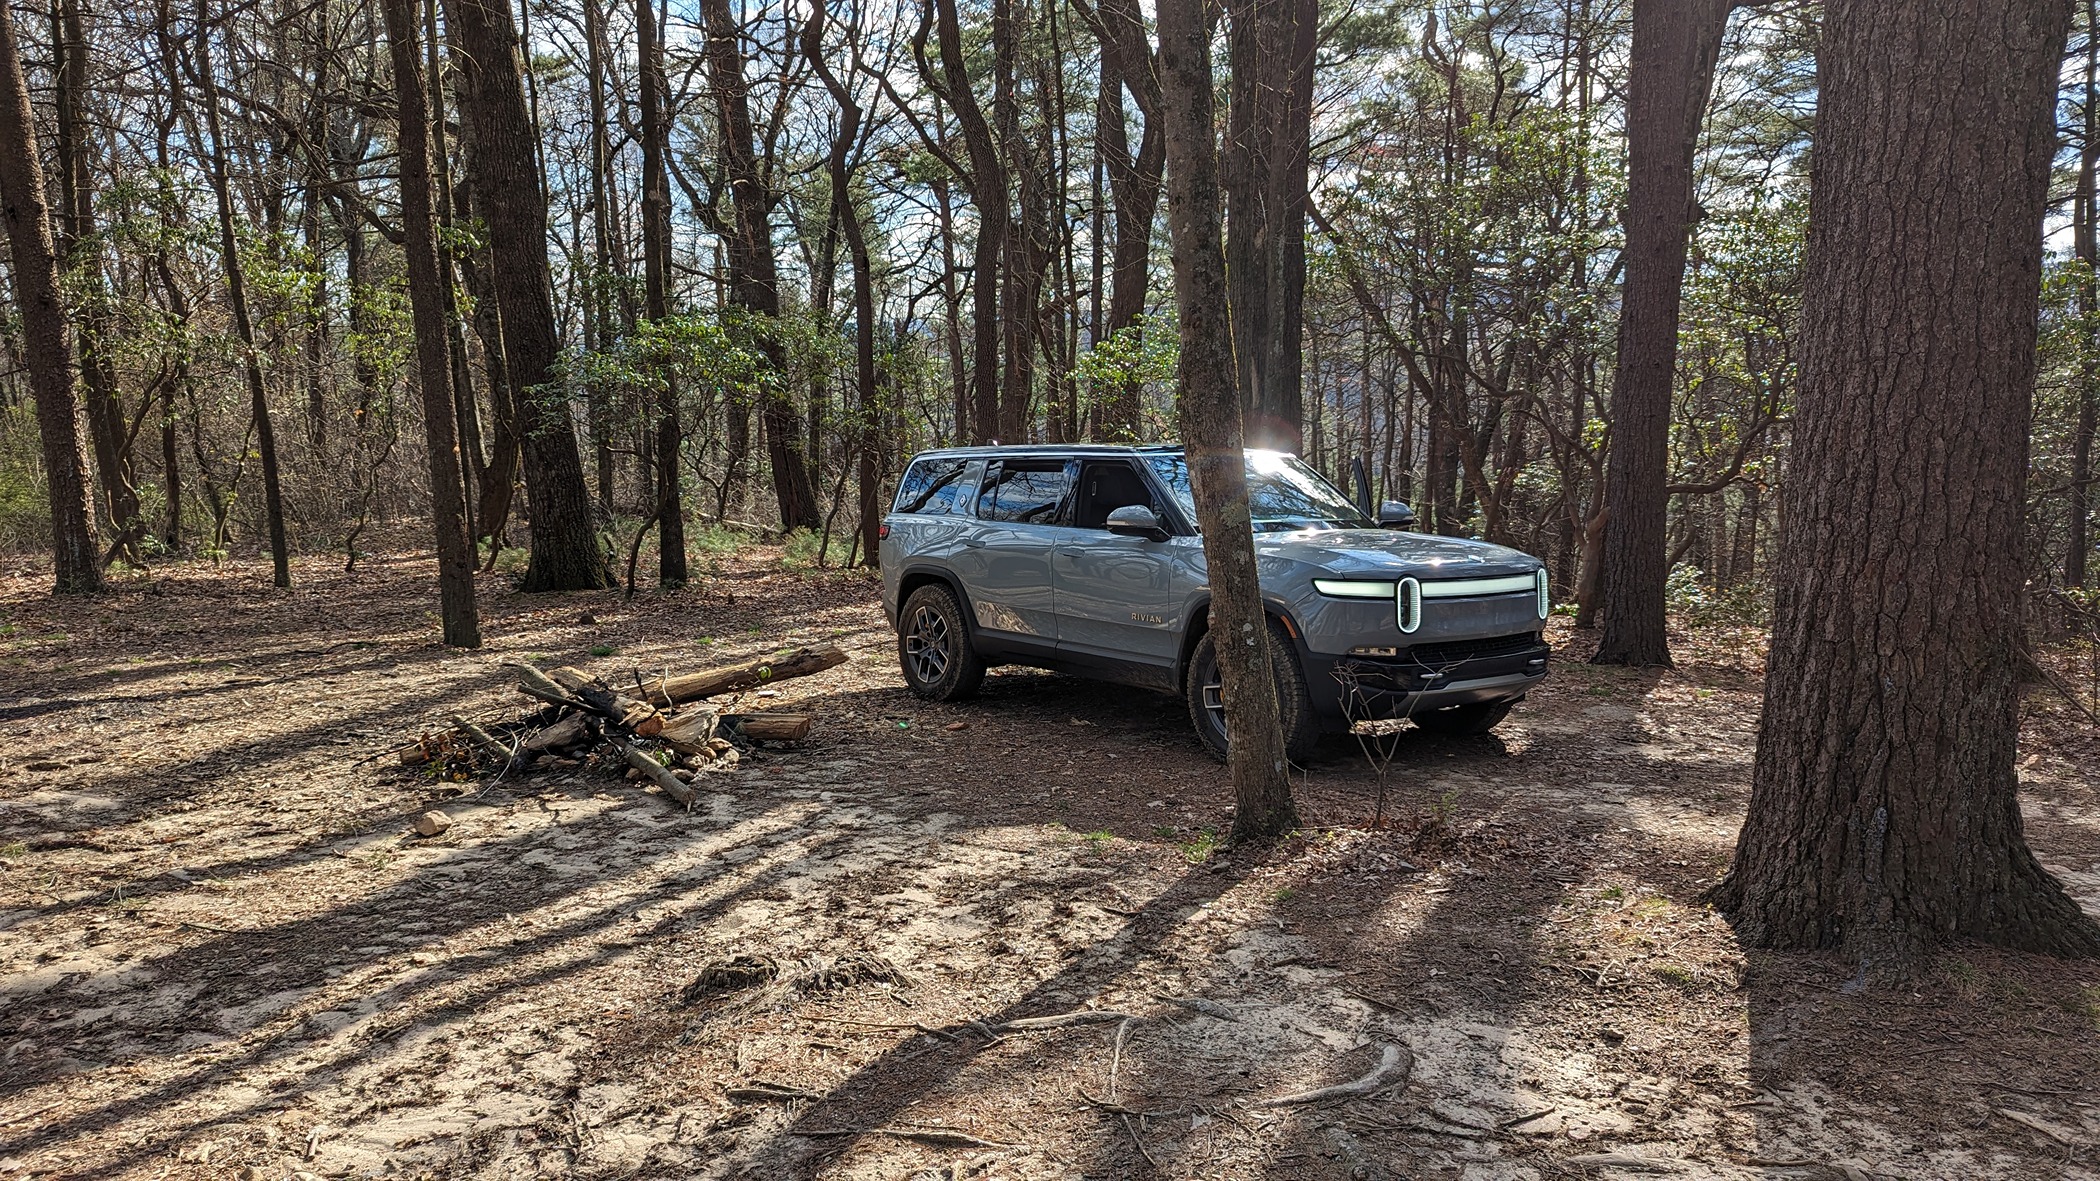 Rivian R1T R1S Random Rivian Photos of the Day - Post Yours! 📸 🤳 1000003490